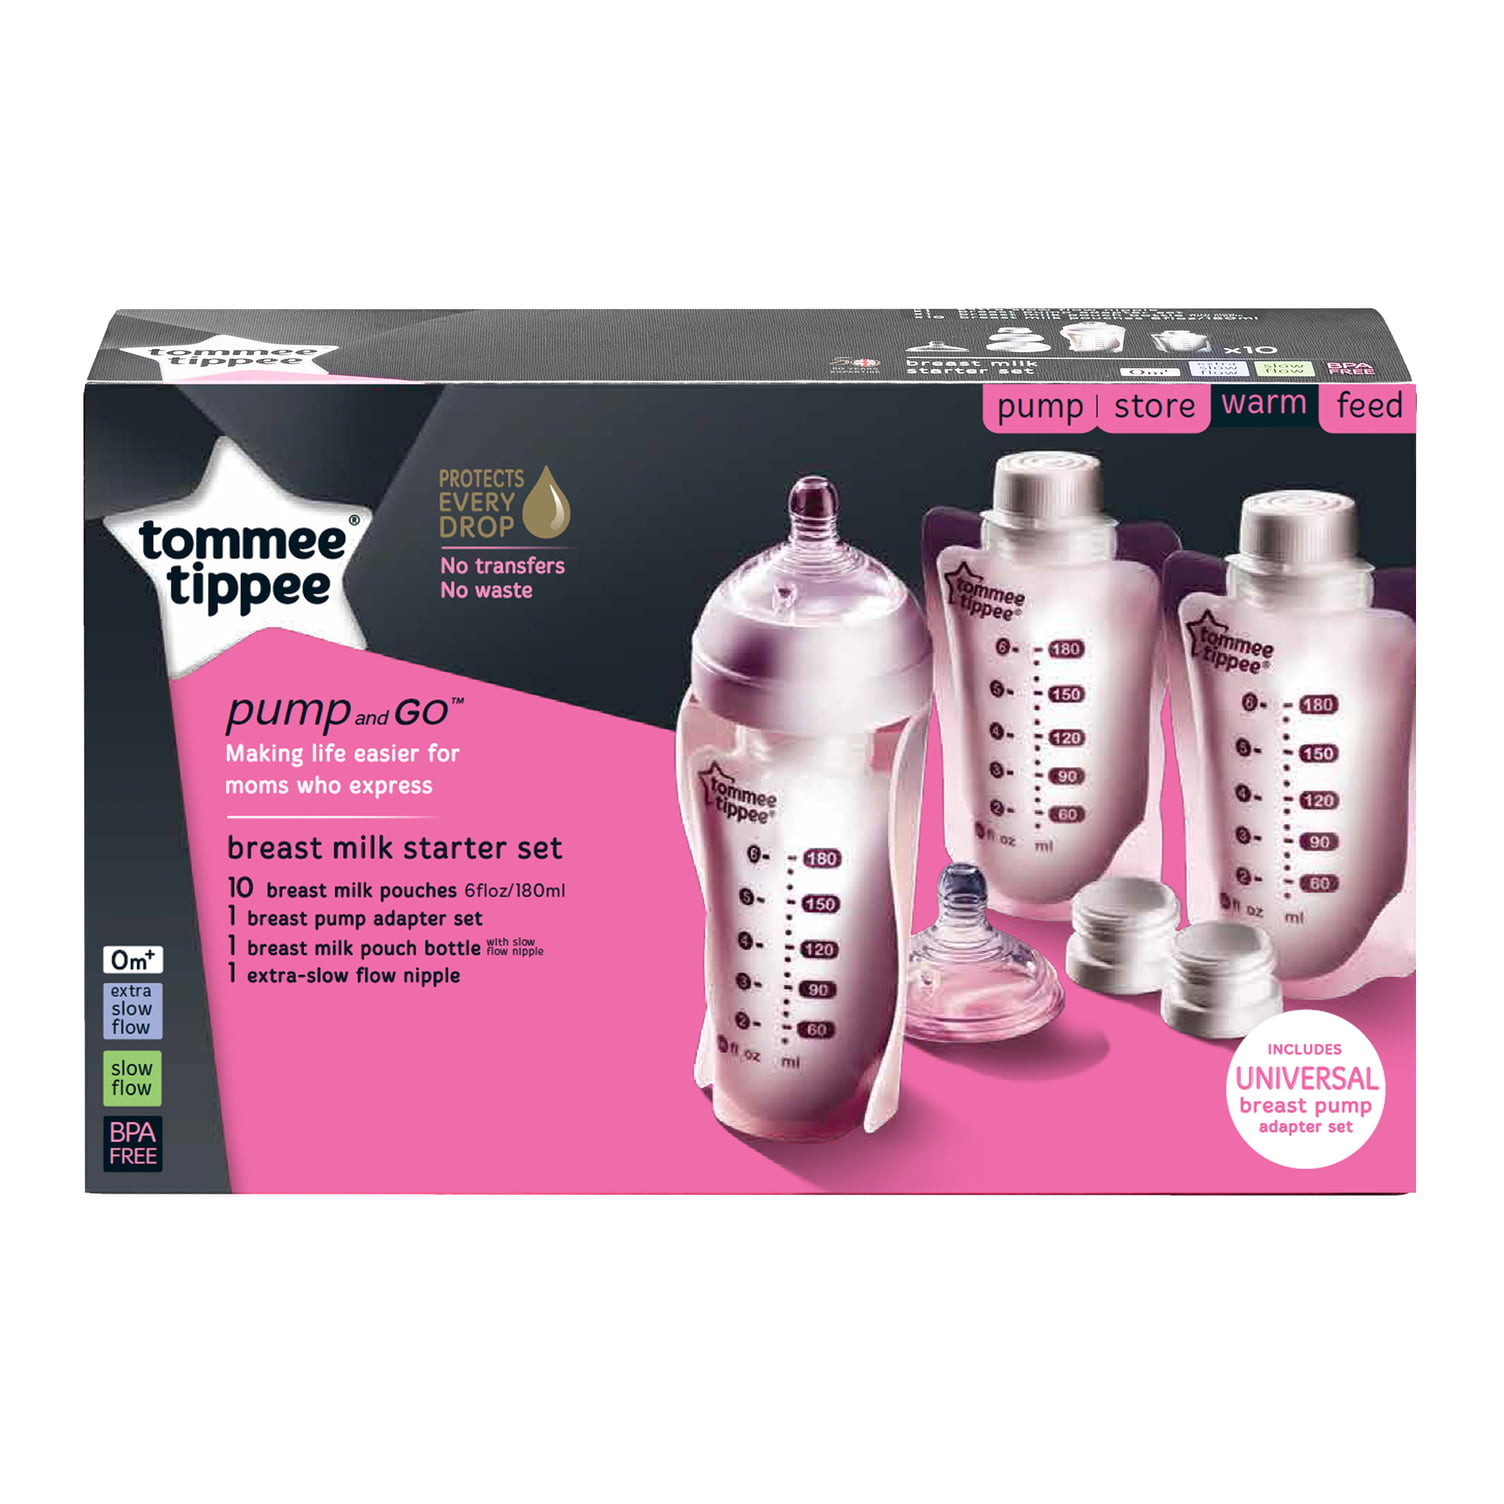 Pump and Go Complete Starter Set by Tommee Tippee - NAPPA Awards